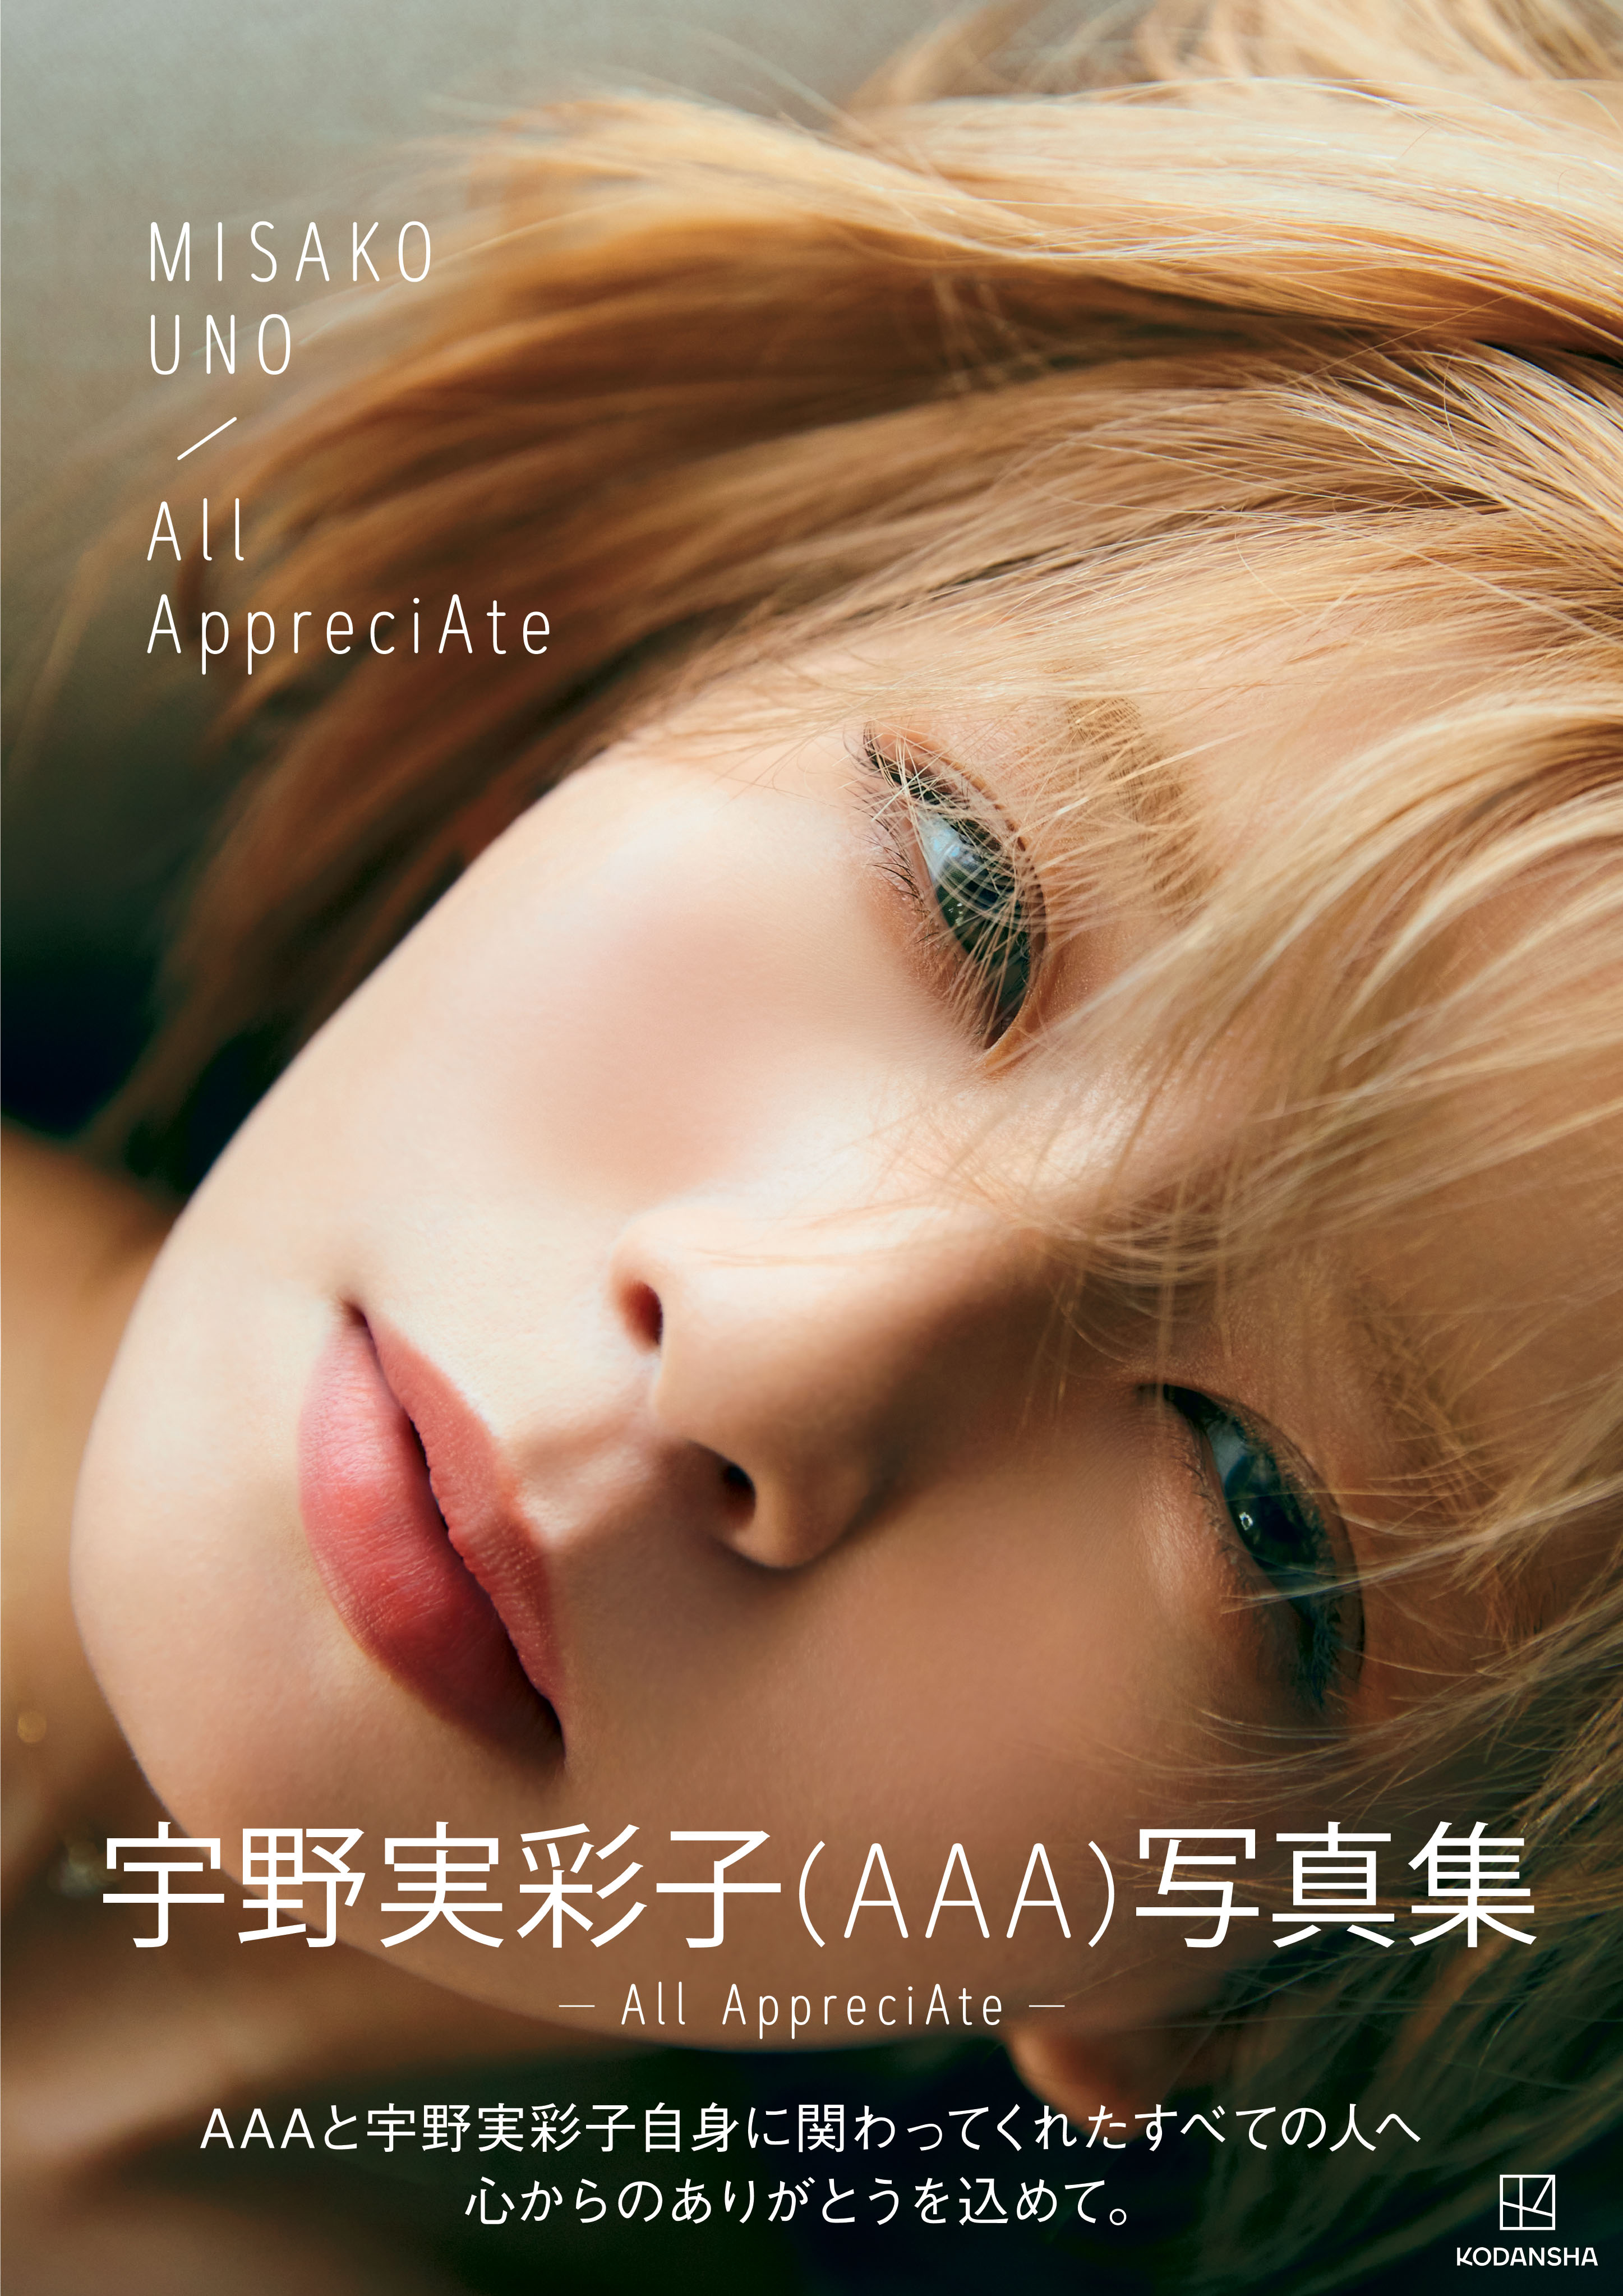 Aaaの宇野実彩子｜4年ぶりの写真集『all Appreciate』7月15日発売 Tower Records Online